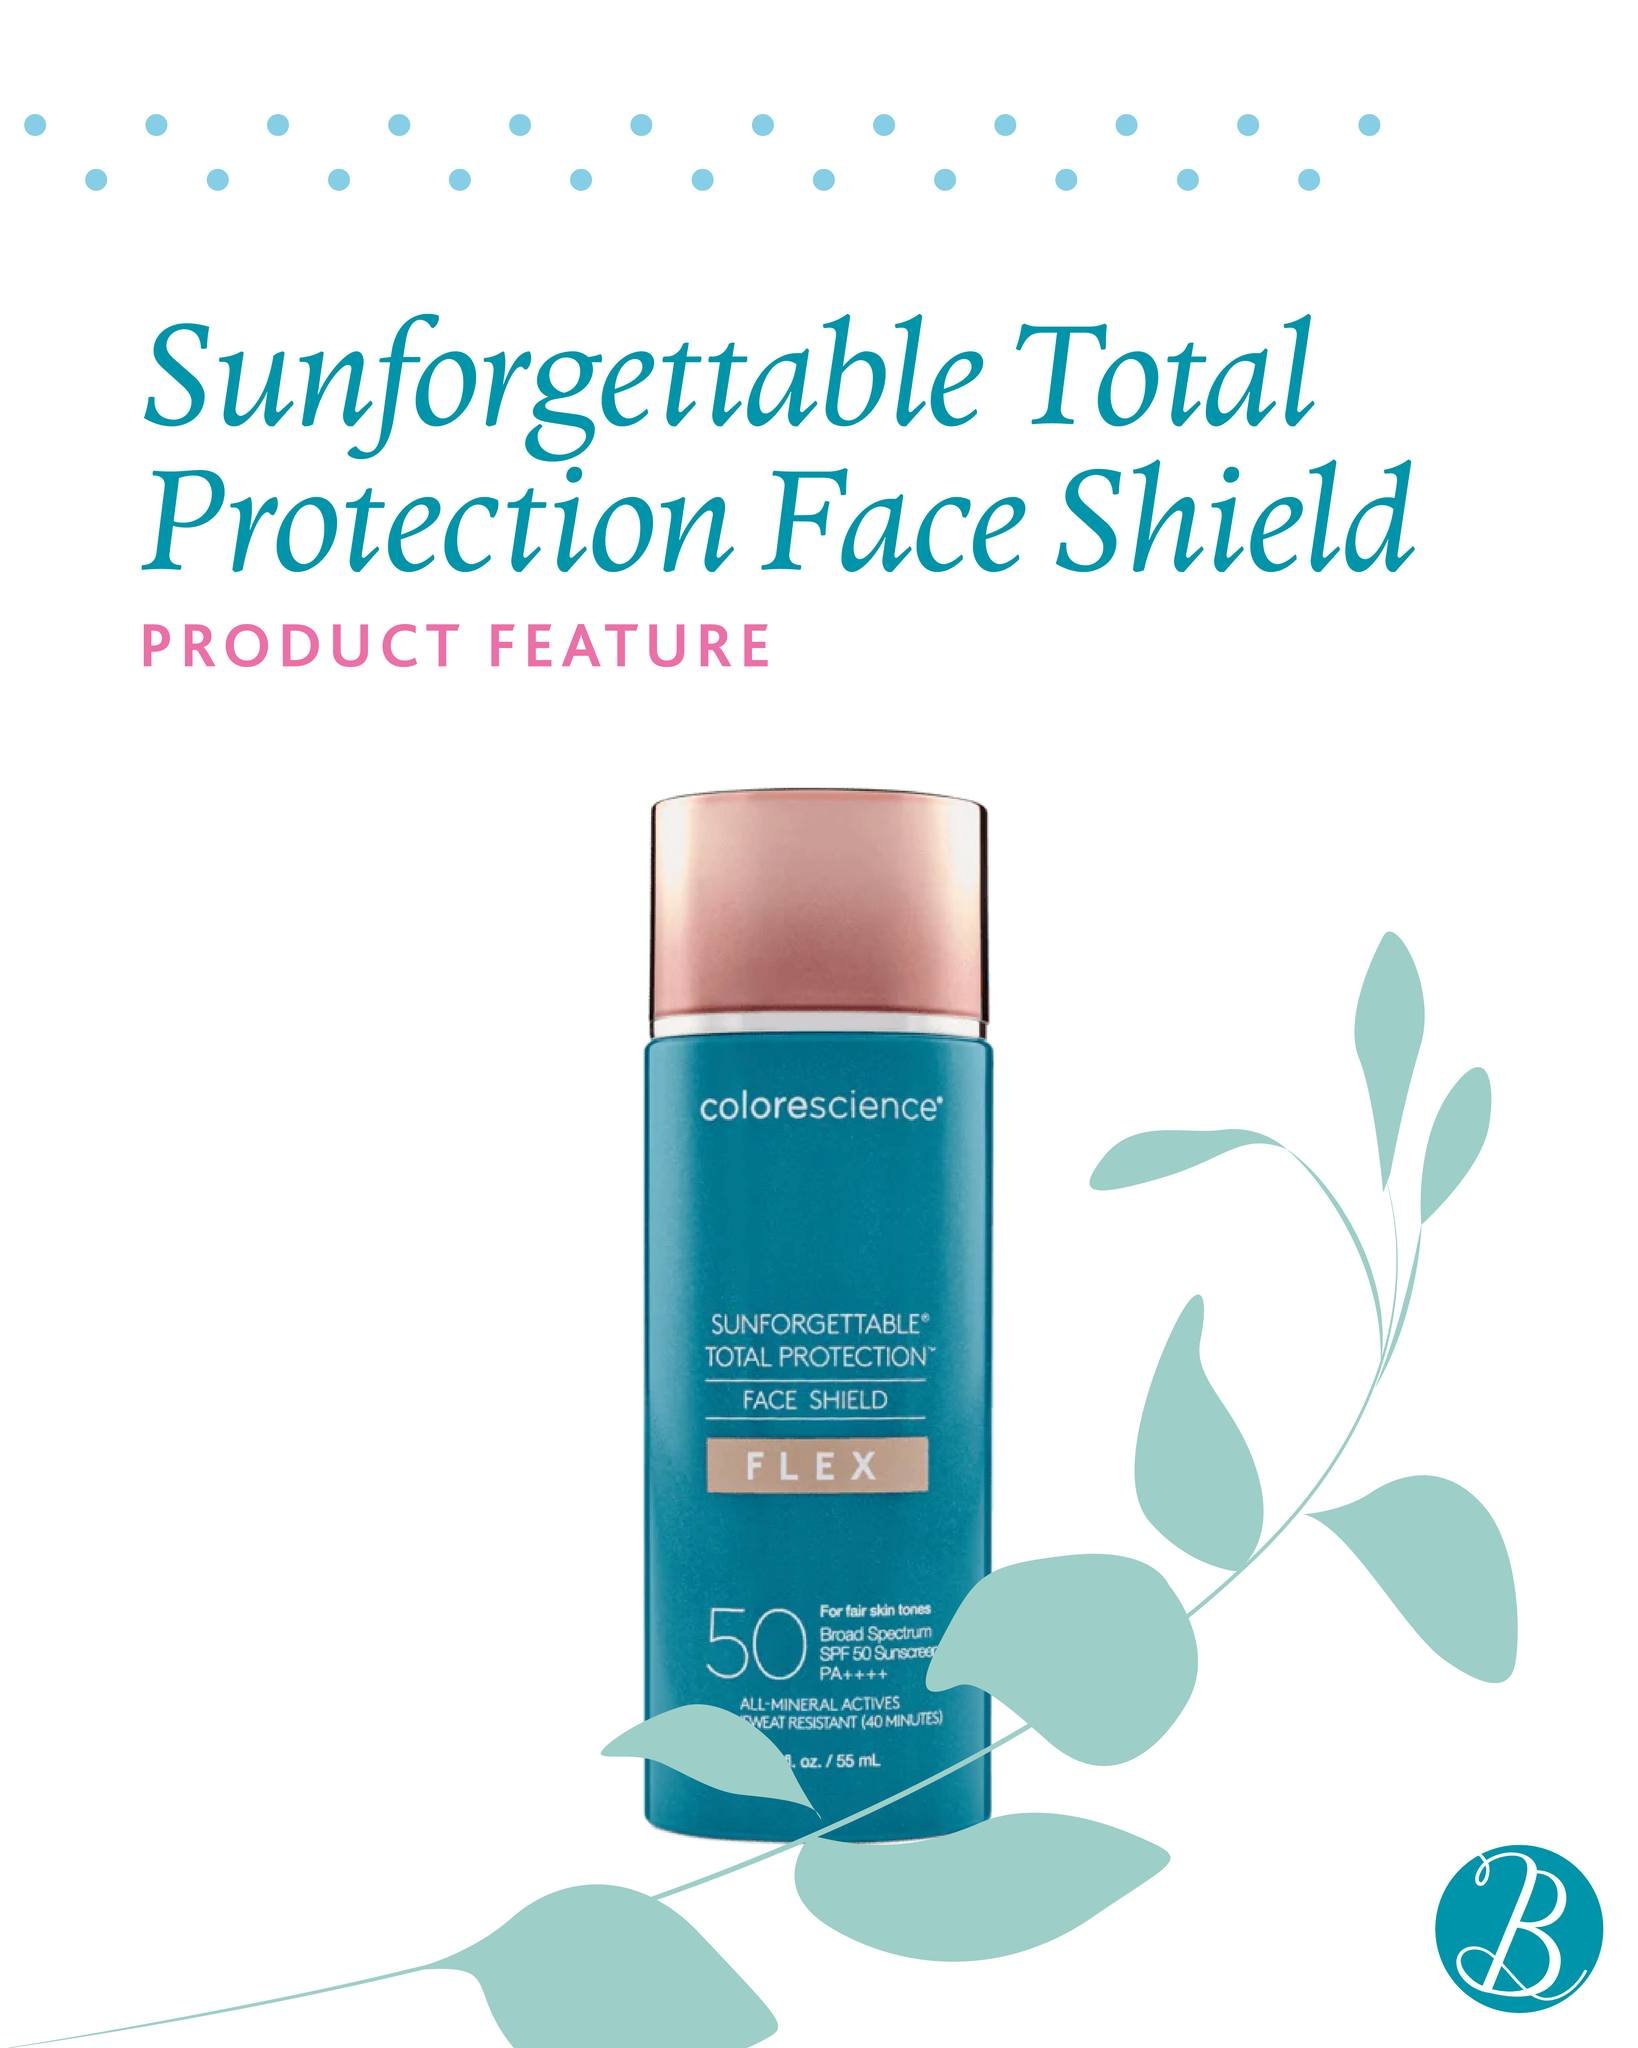 Looking for some Sunscreen that&rsquo;s easy to use as part of your daily skincare routine?

We now stock Colorescience Sunforgettable Total Protection Face Shield Flex SPF50 (priced at &pound;43). This lightweight mineral sunscreen has tinted colour